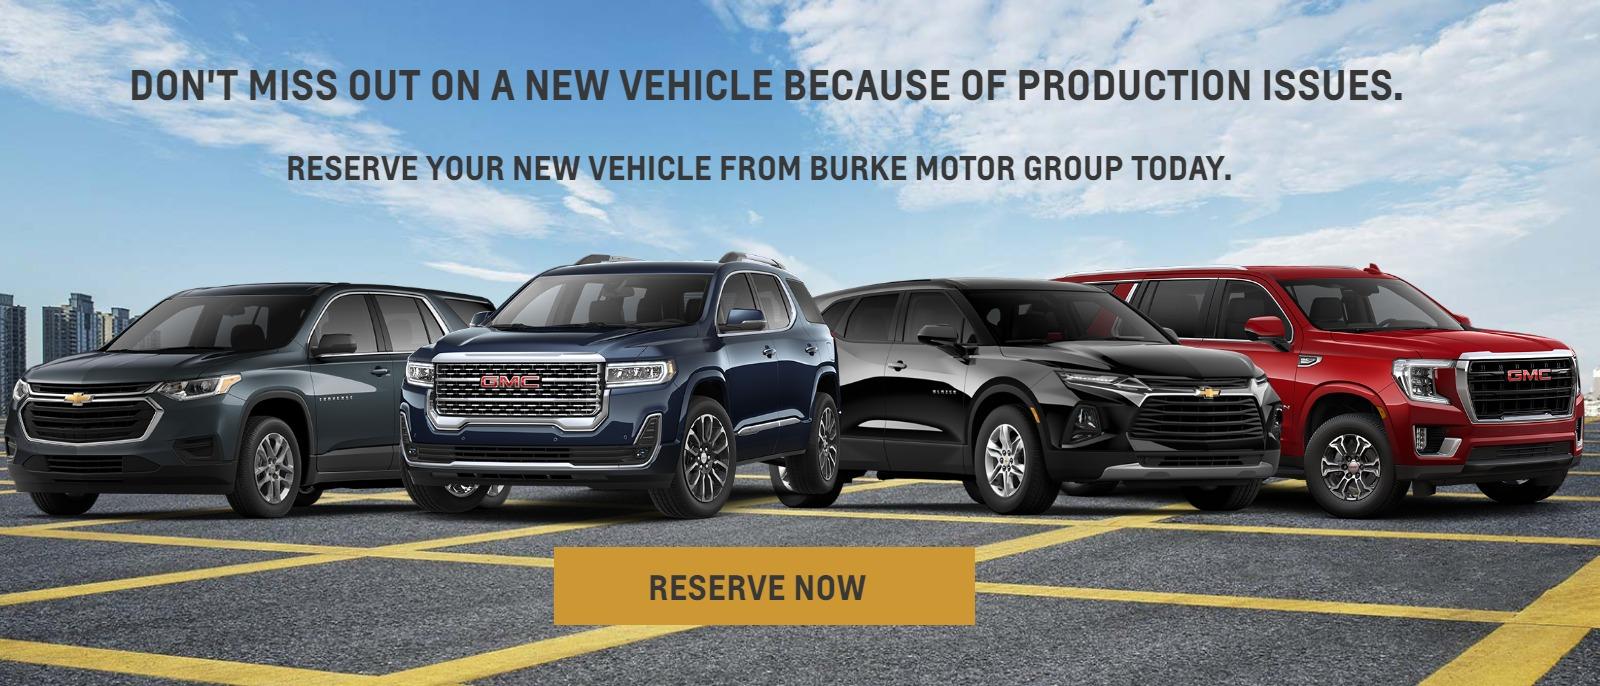 Don't miss out on a new vehicle because of production issues. 
Reserve your new vehicle from Burke Motor Group today.